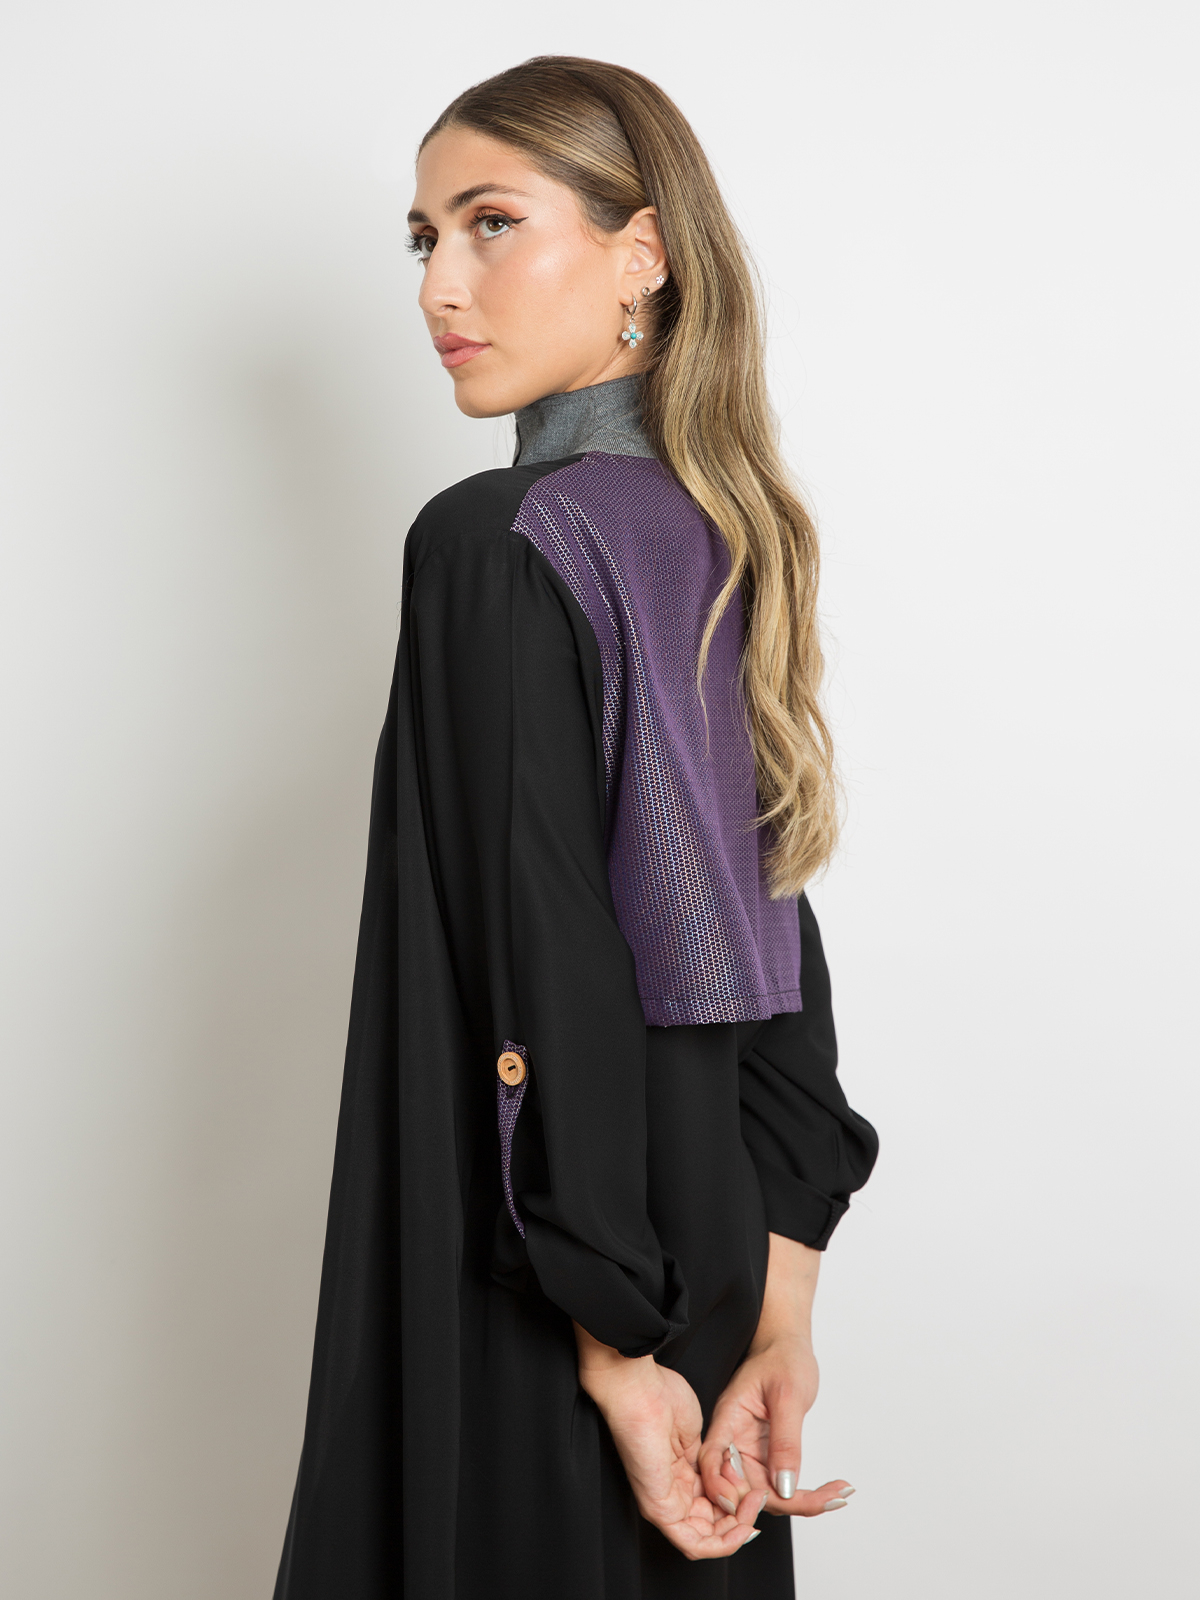 Black with Purple Beehive - Casual Regular-fit Long Open Abaya in Soft Fabric with Yoke